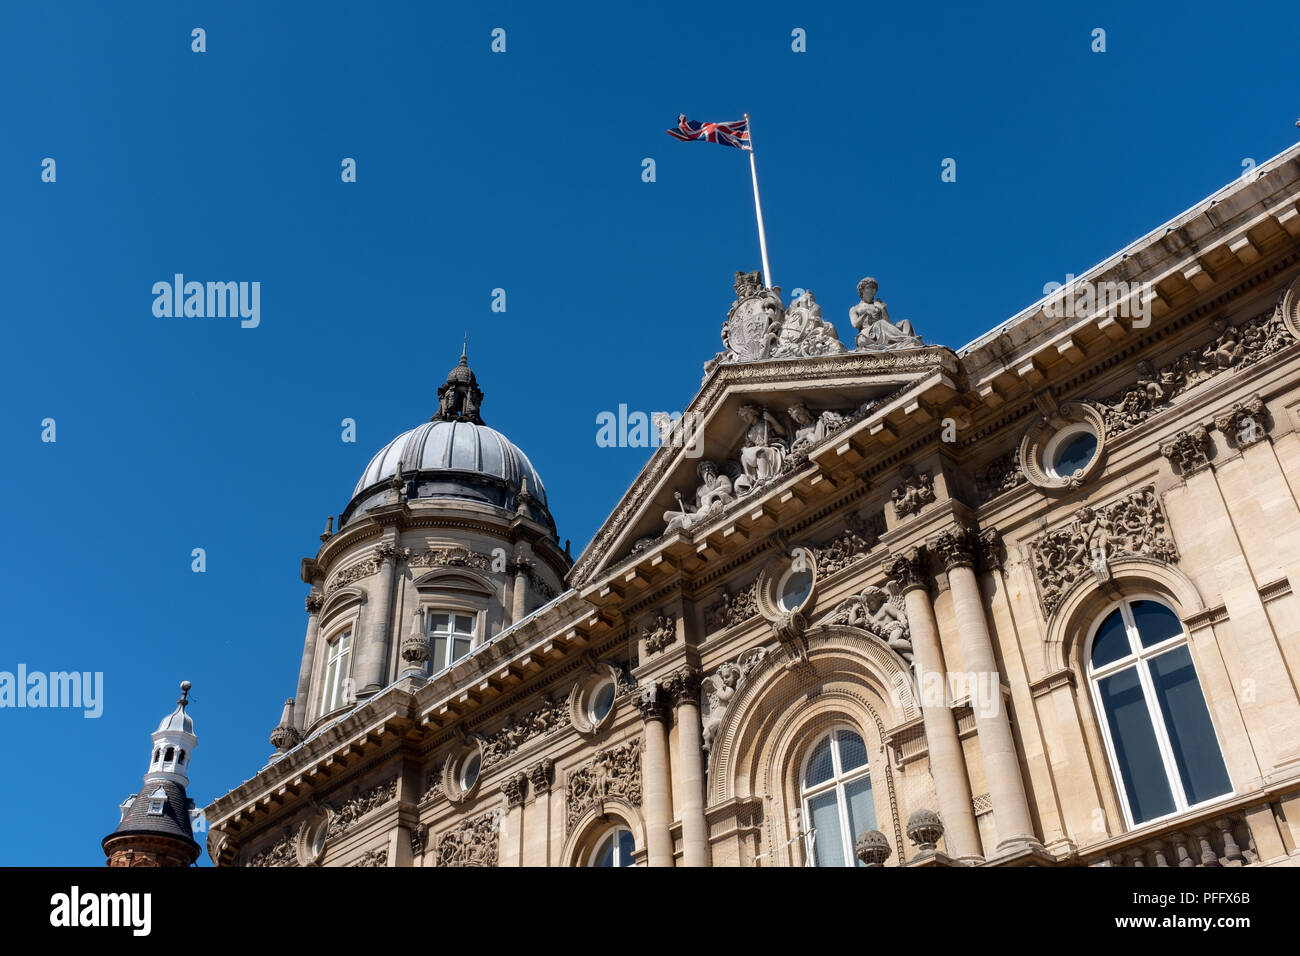 Image of Kingston Upon Hull UK City of Culture 2017. Town dock museum against a blue sky and the union flag flying. Stock Photo